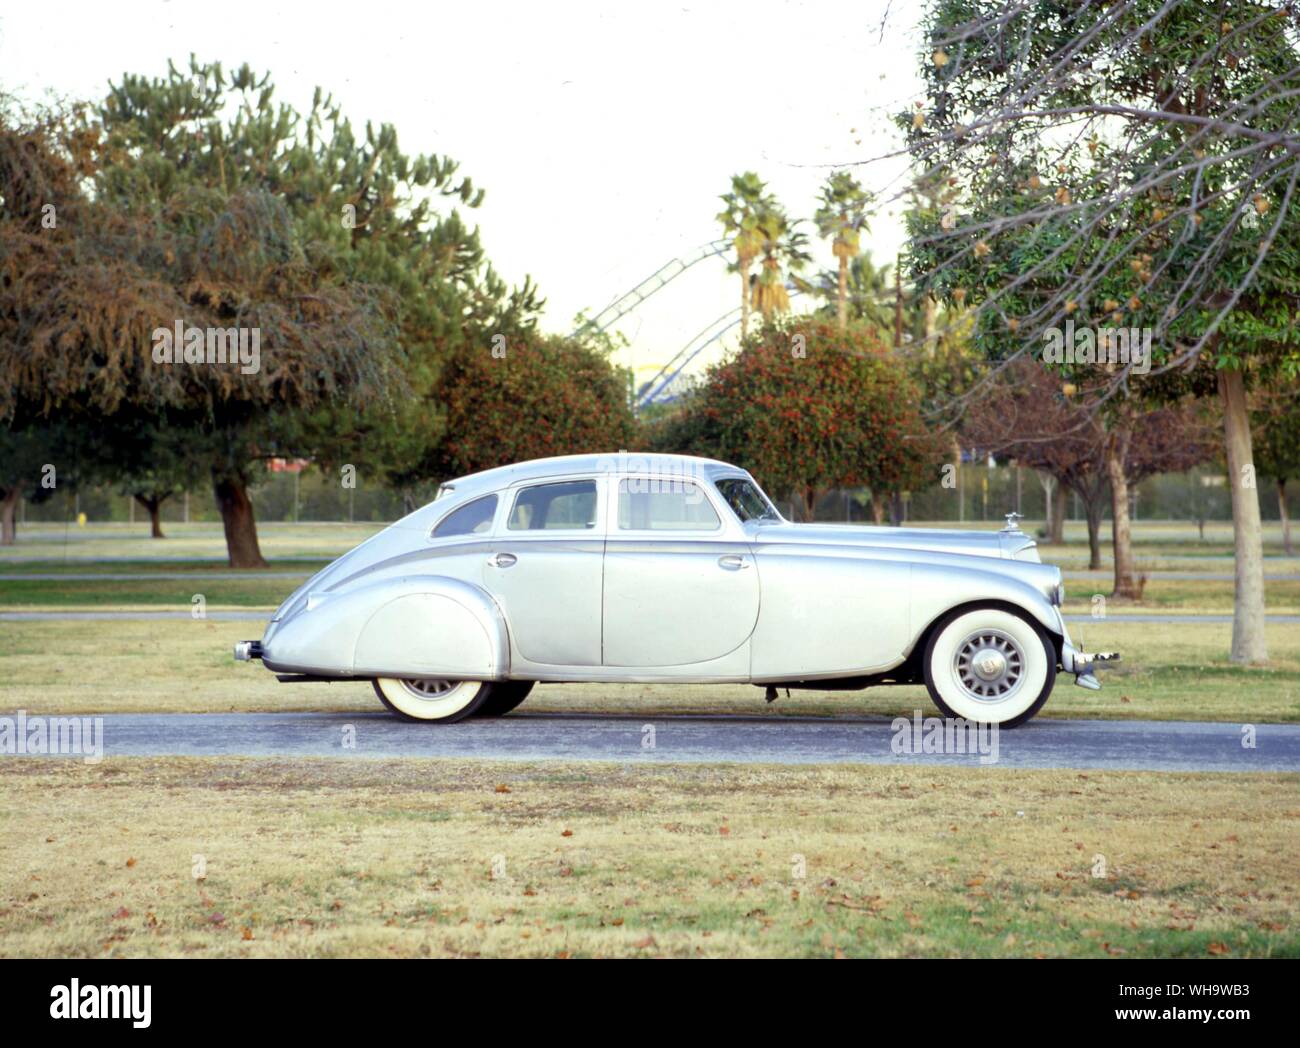 The car built in the 1930s for the 1940s, the 1933 Pierce Silver Arrow V12 Stock Photo